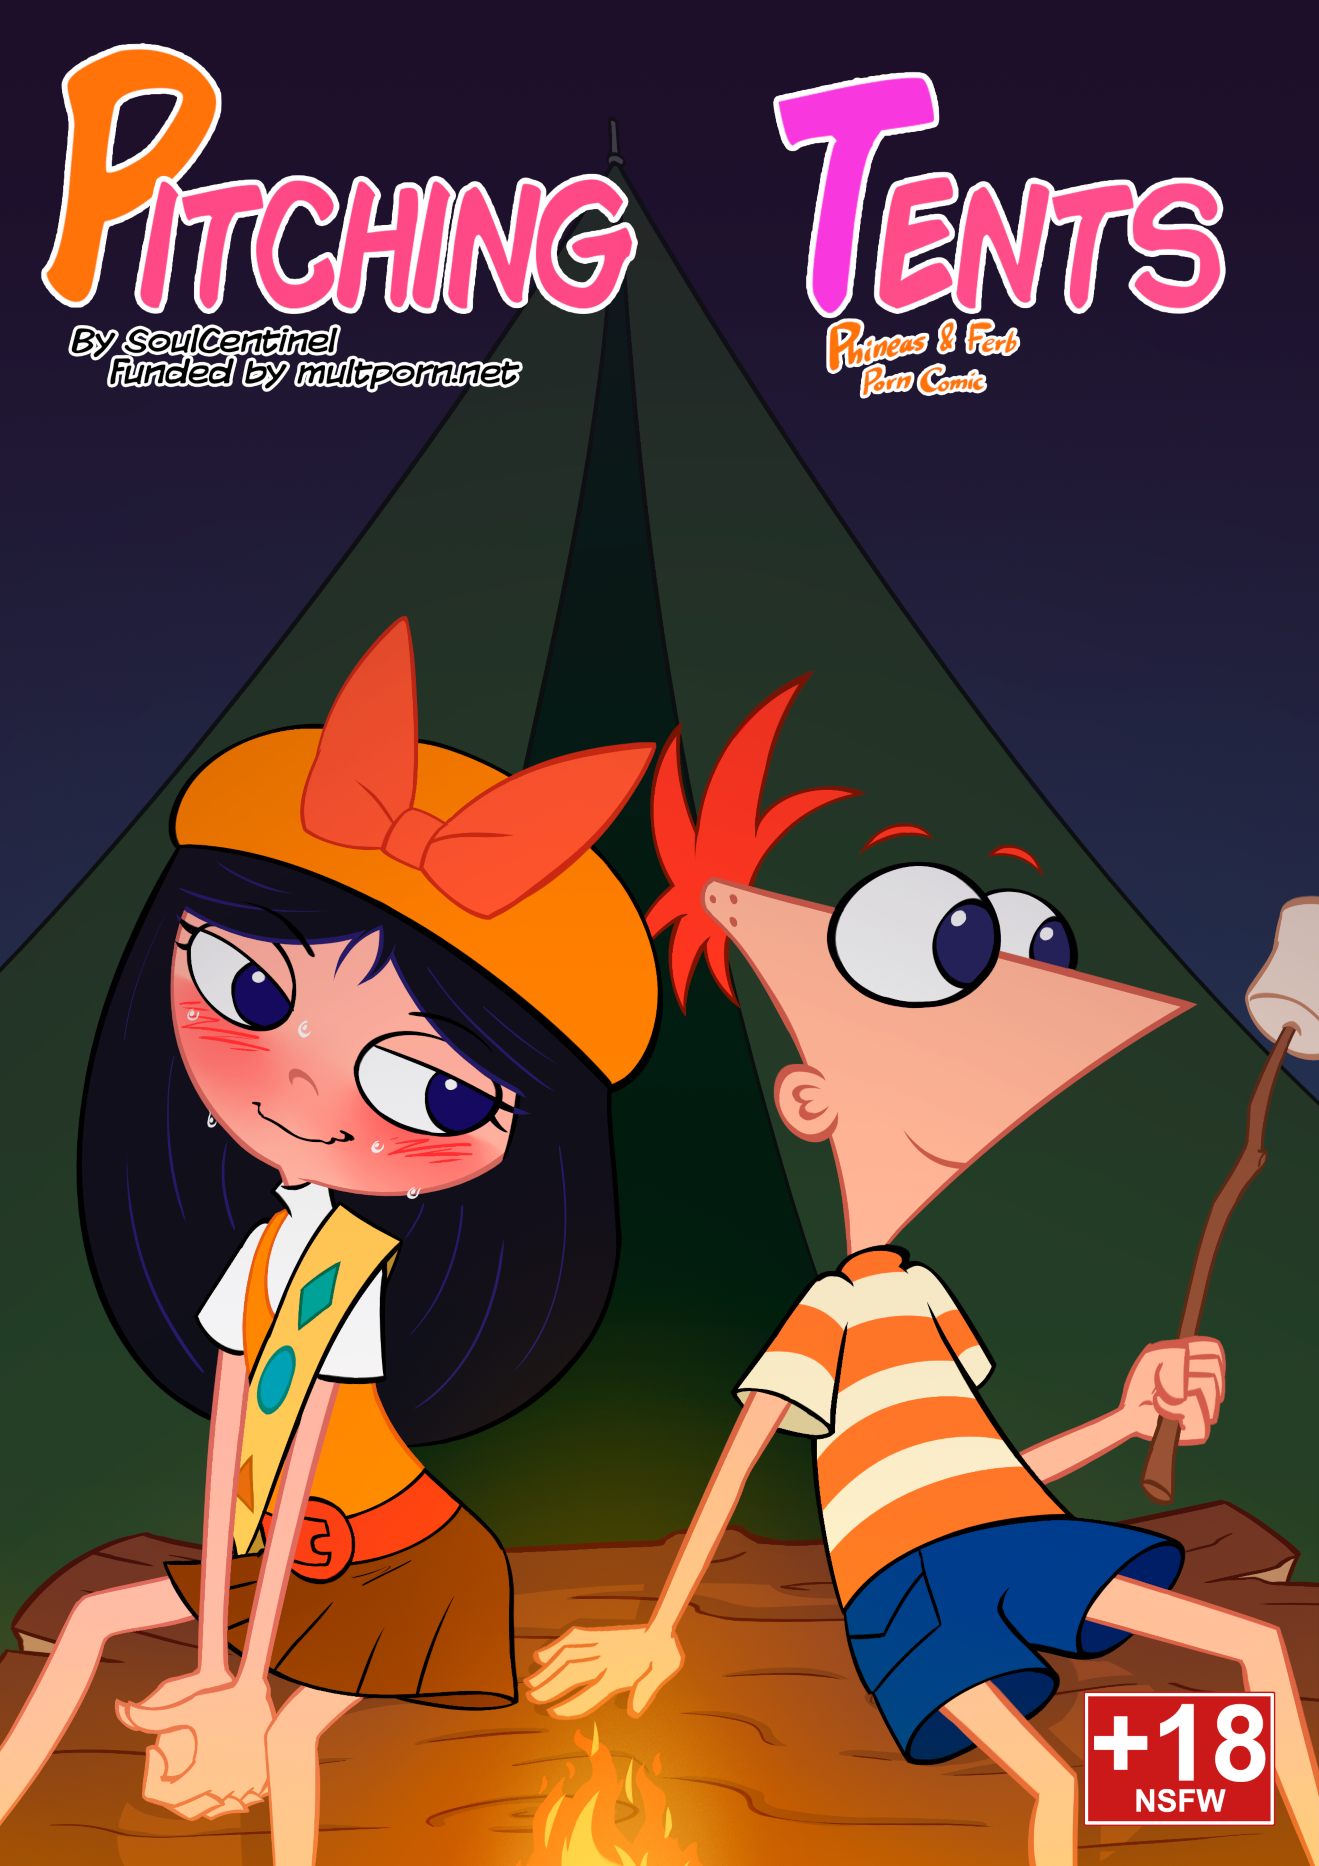 Phineas And Ferb Porn Blowjob - Pitching Tents - Phineas and Ferb [SoulCentinel] - FreeAdultComix